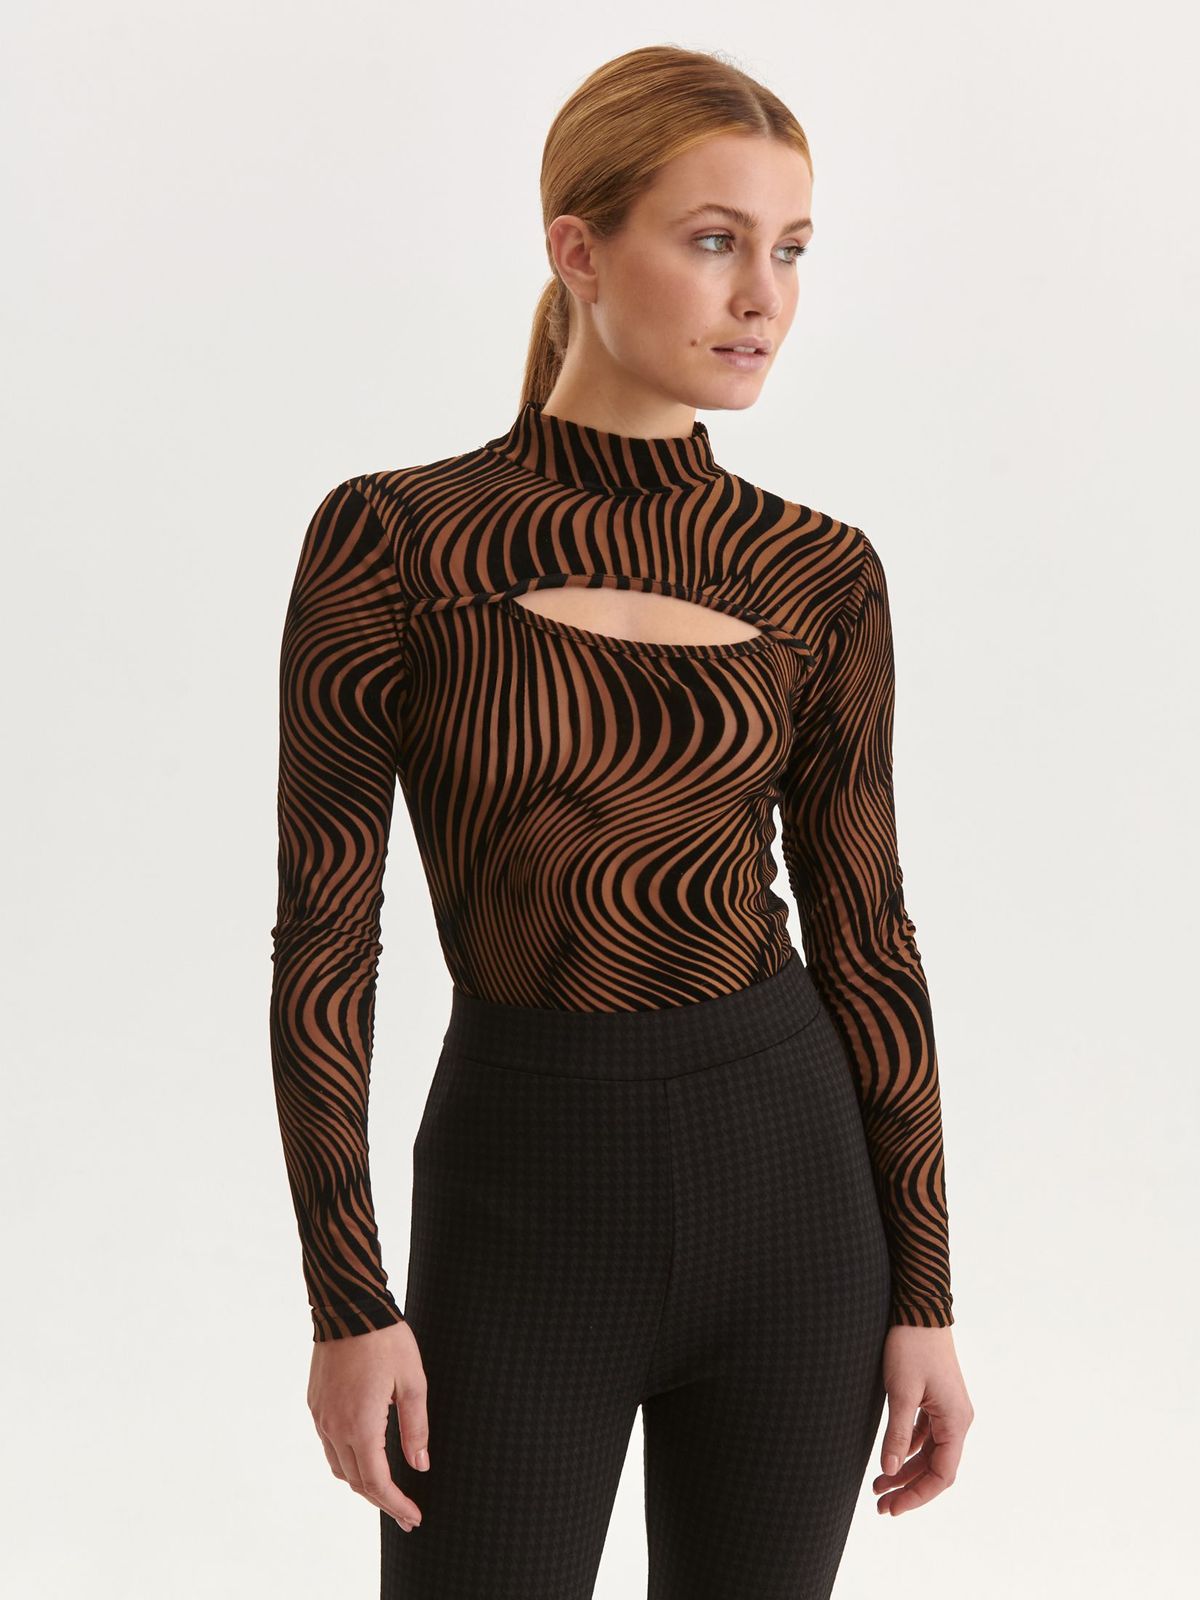 Brown sweater from elastic fabric with tented cut cut-out bust design